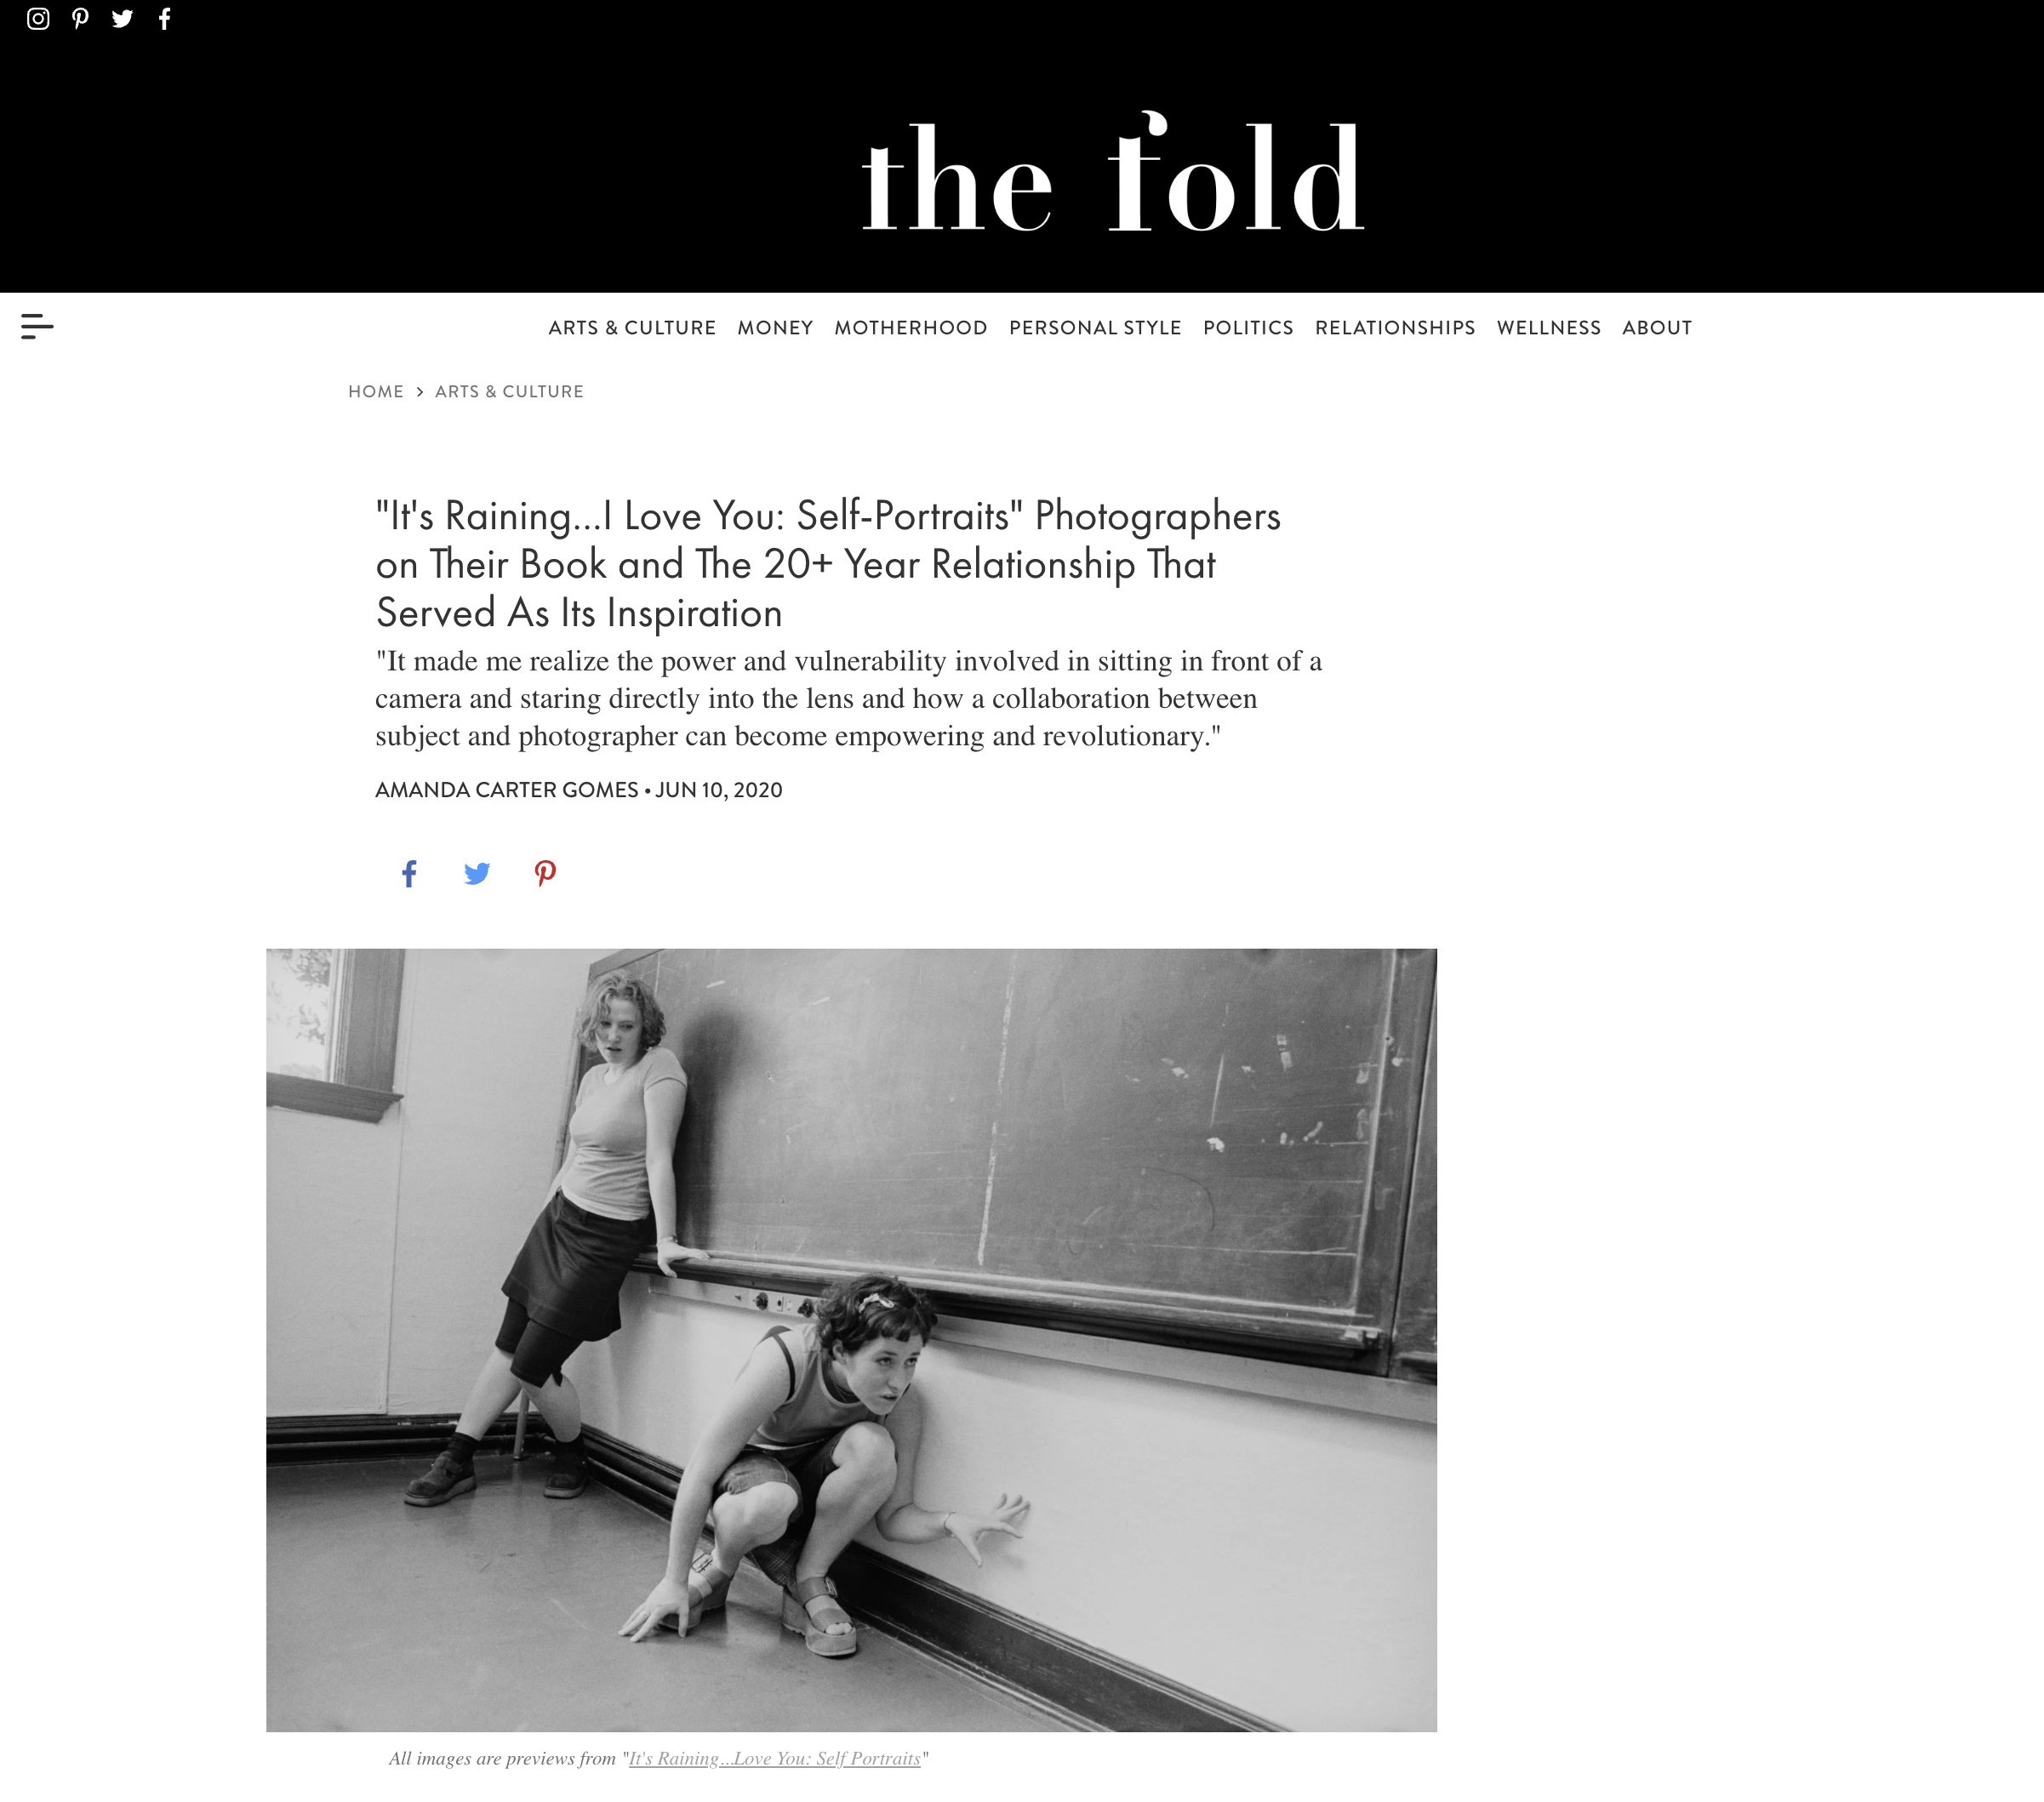   Link to full interview on The Fold Mag  